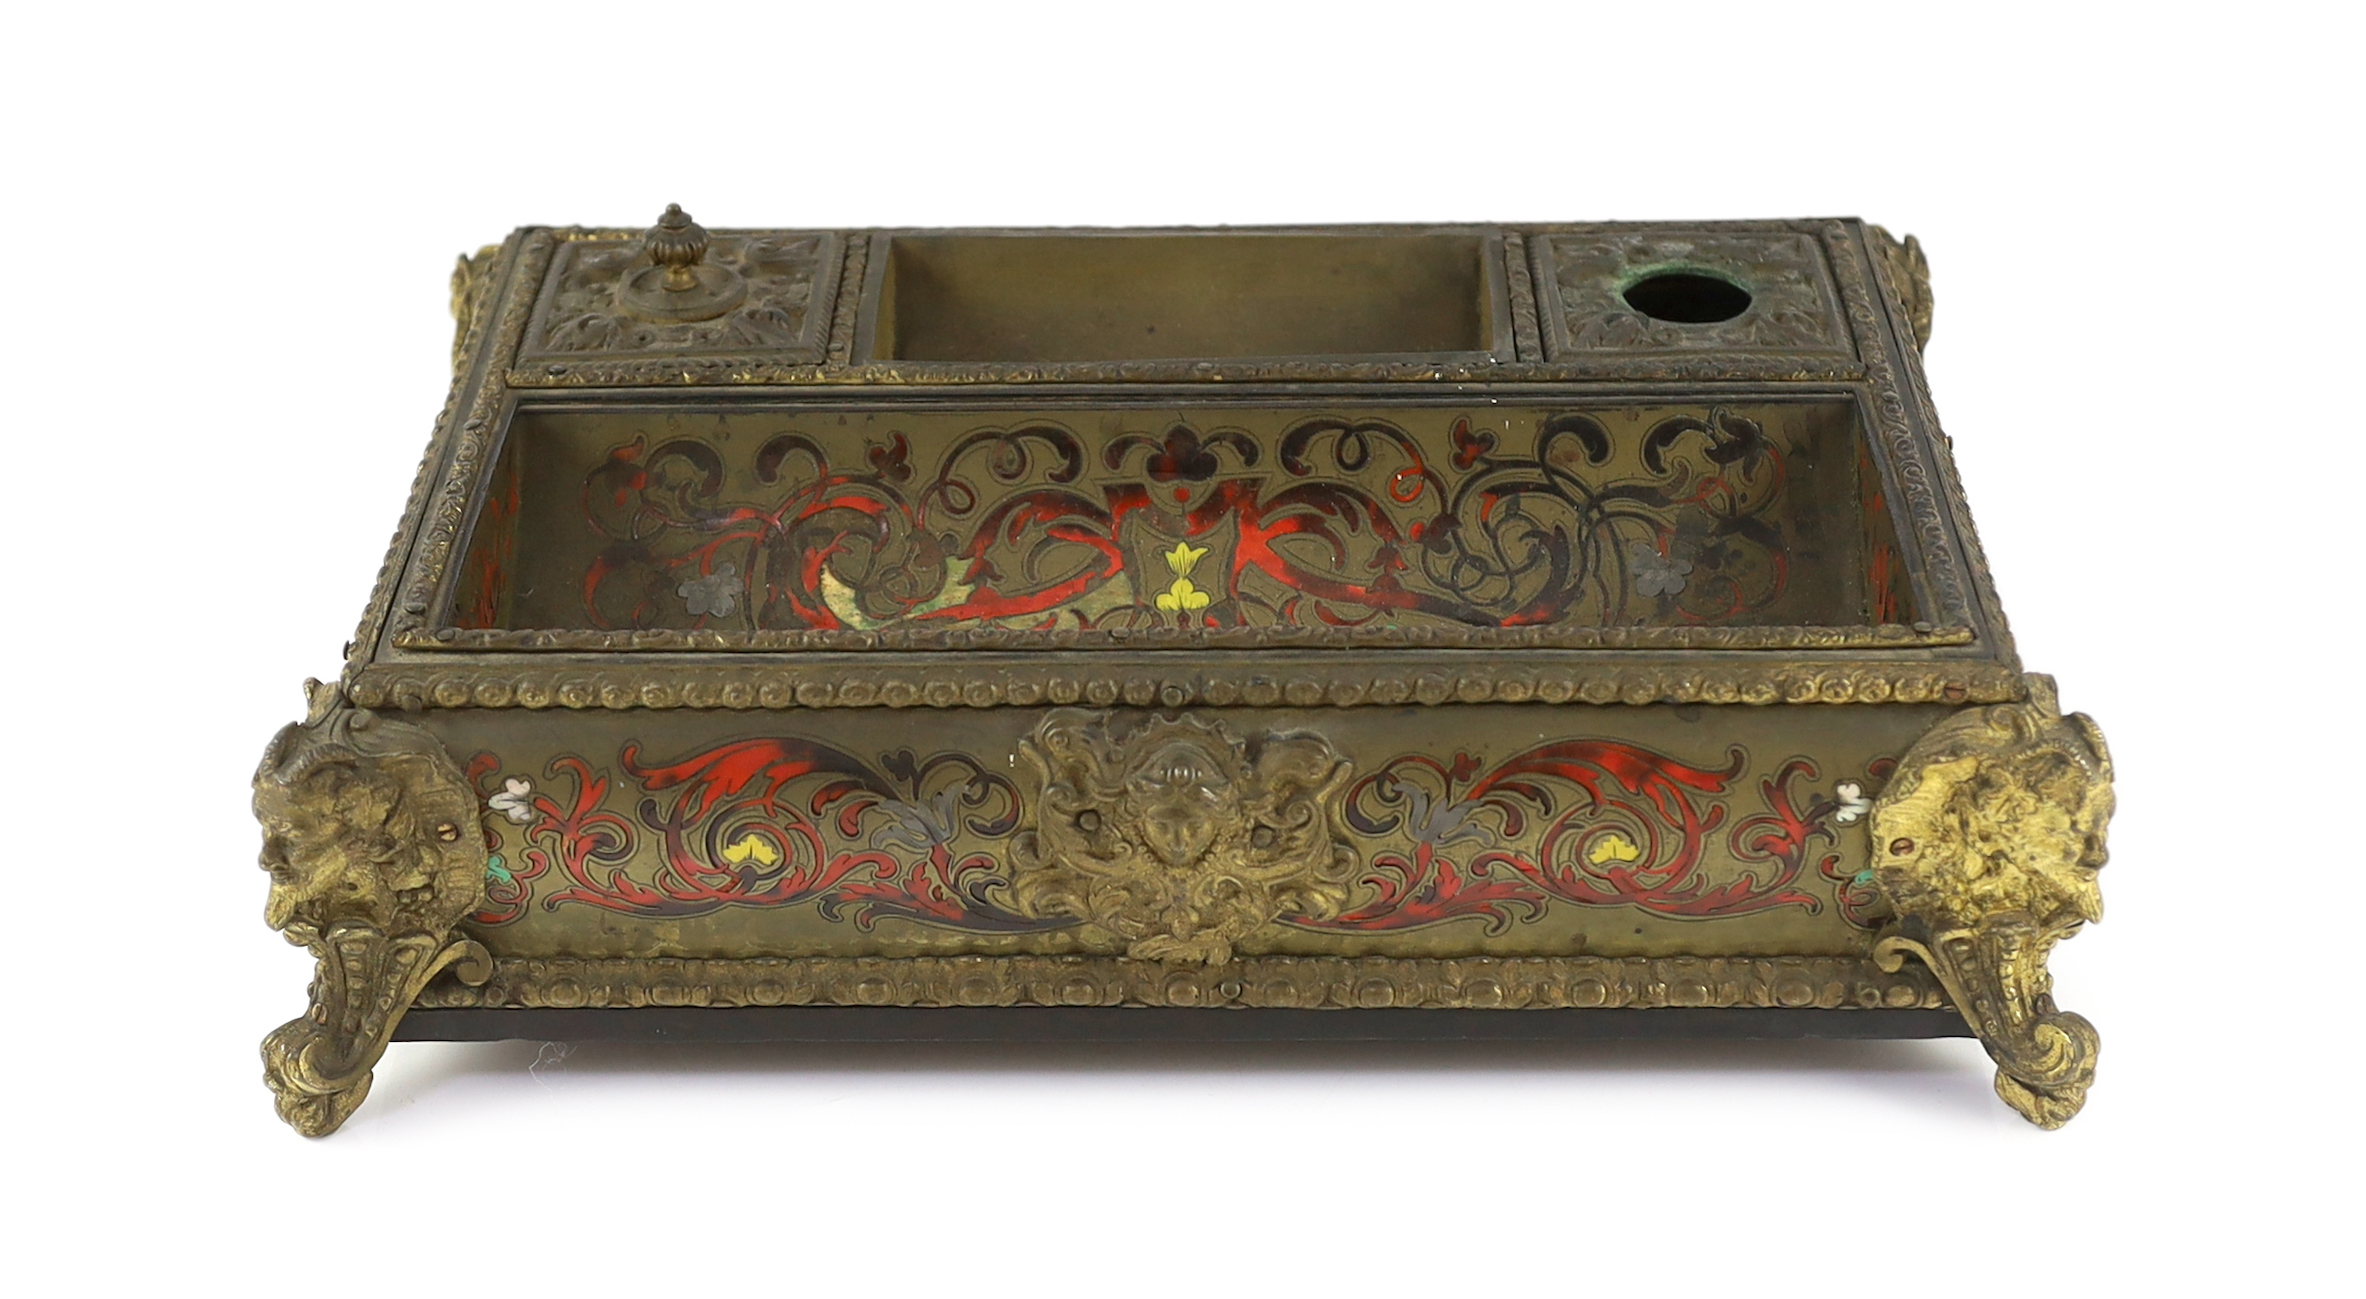 A 19th century French scarlet Boulle work desk stand with ormolu mounts, 36cm wide